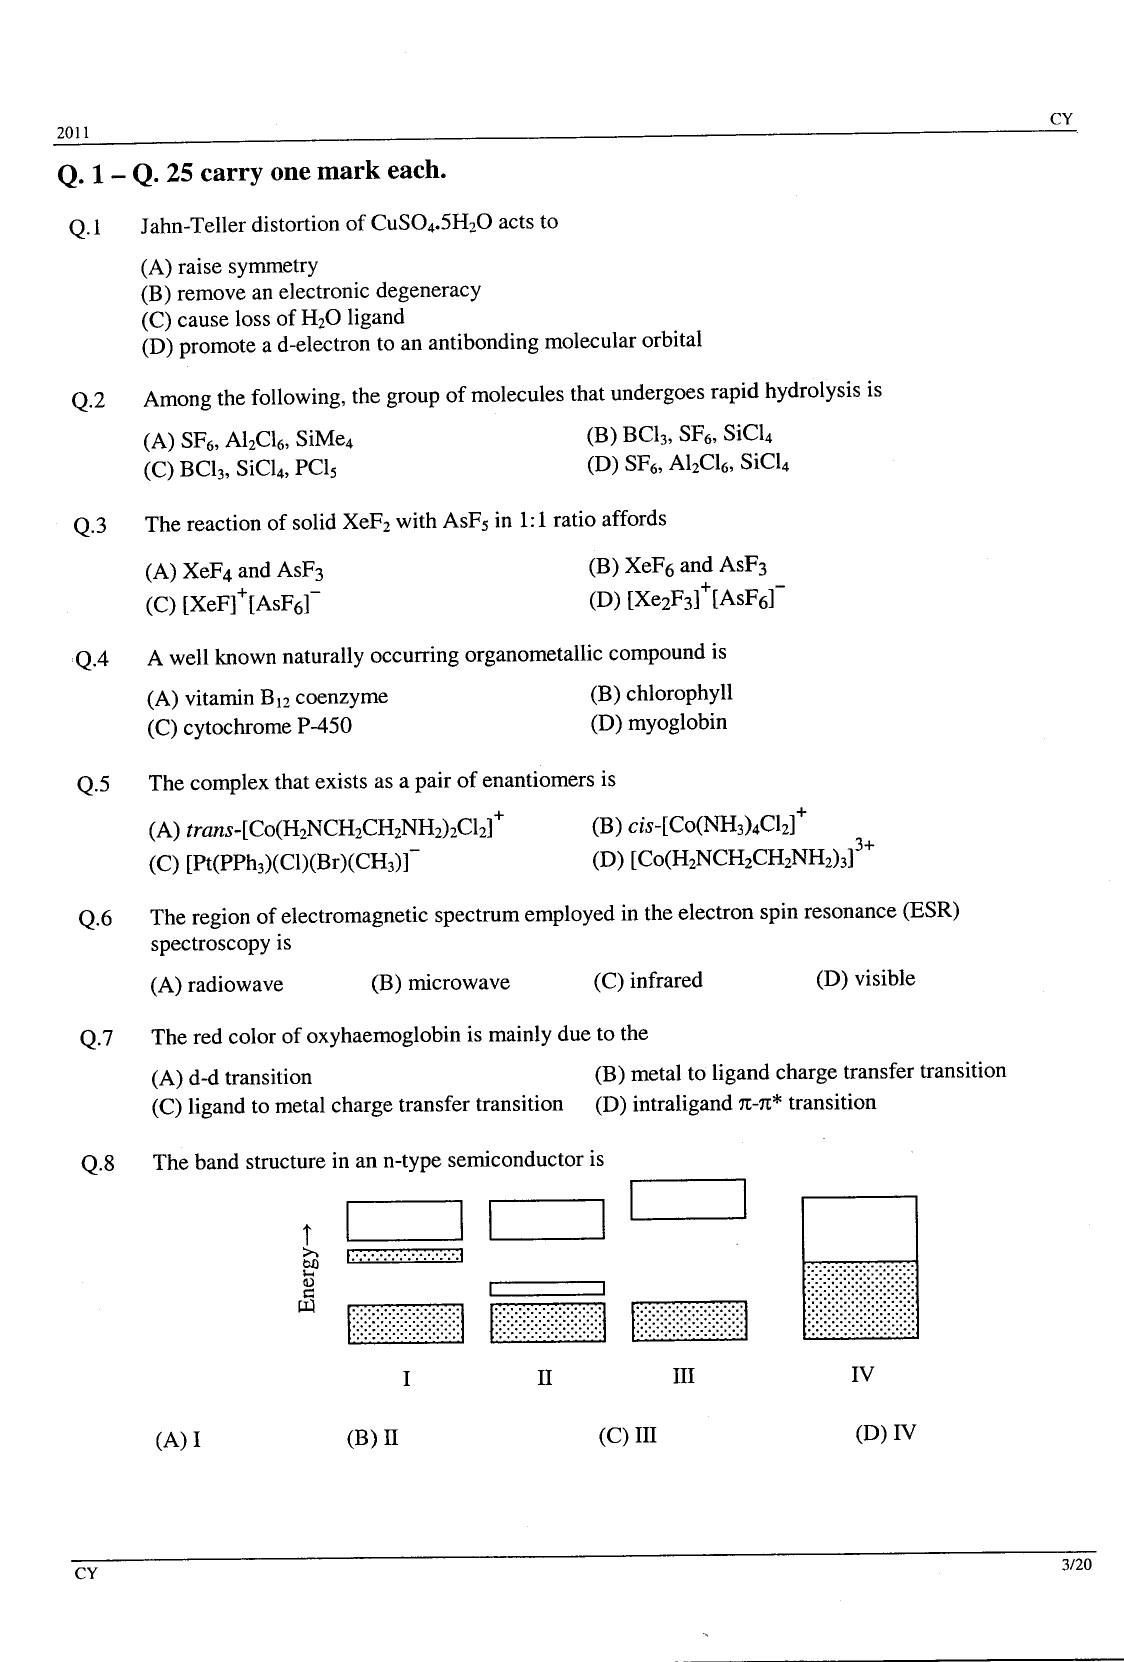 GATE Exam Question Paper 2011 Chemistry 3